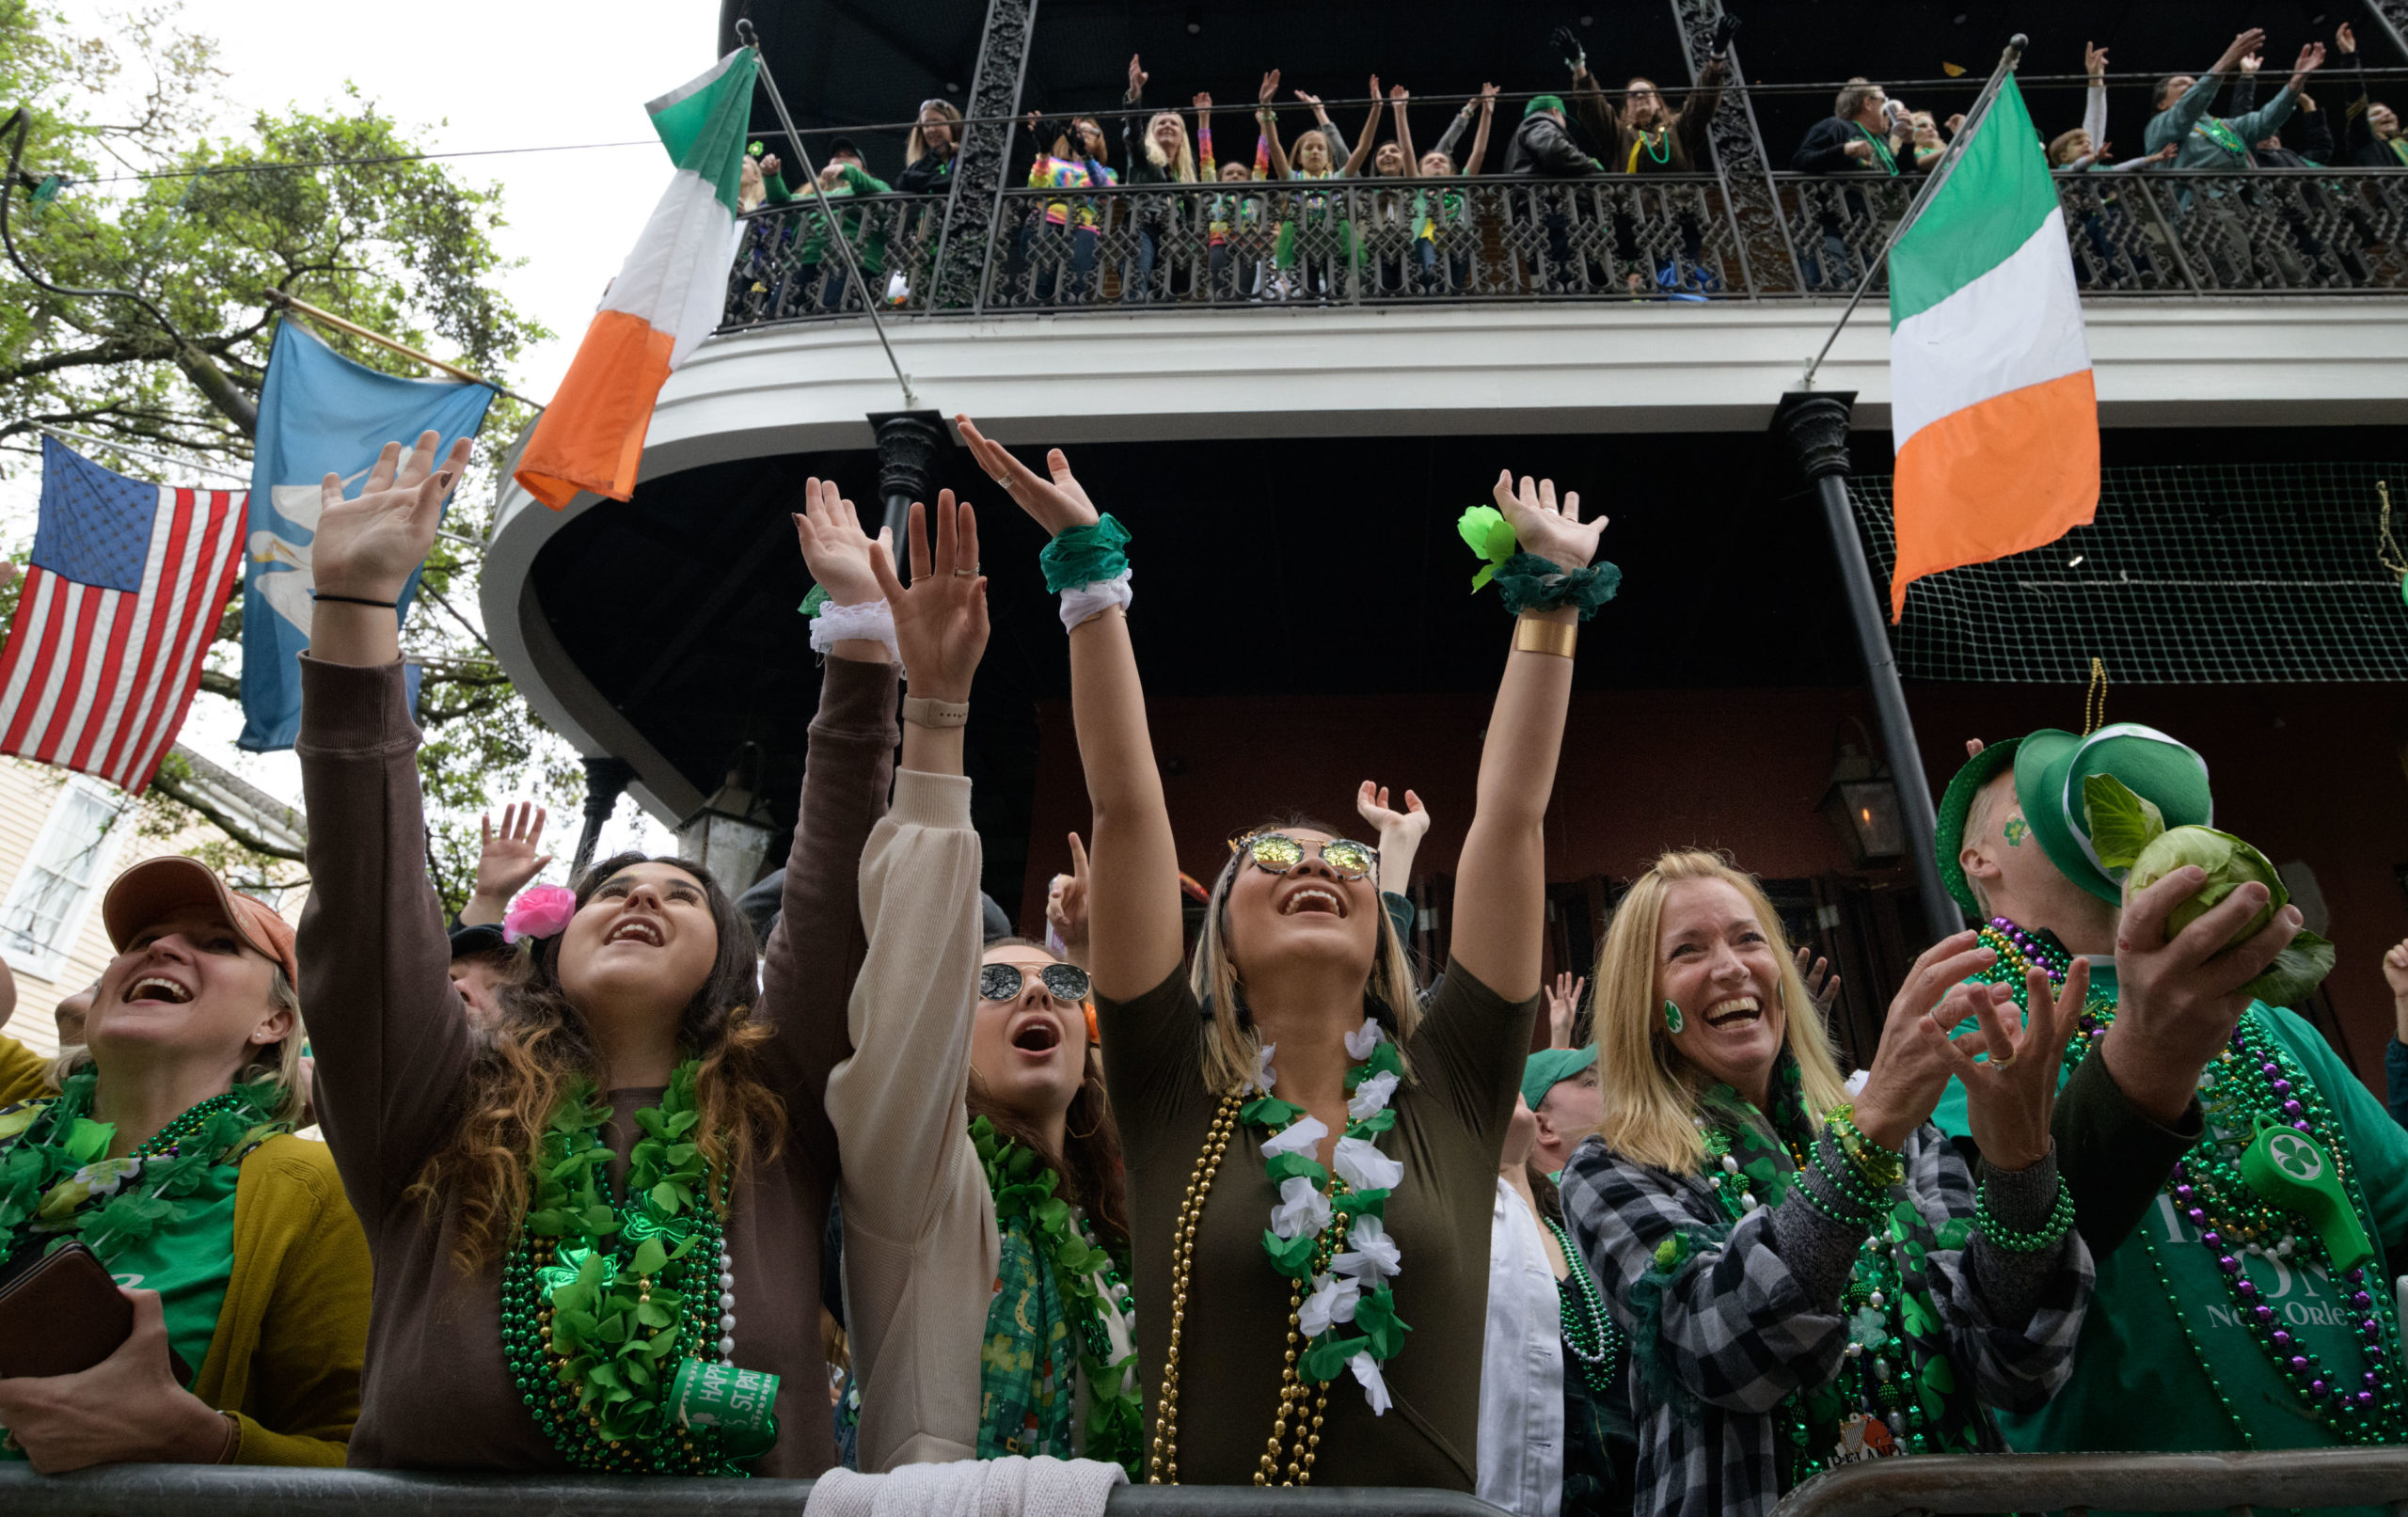 Crowds beg for beads and cabbage from both stories of Tracey's Original Irish Channel Bar, which is celebrating its 70th anniversary, during the Irish Channel St. Patrick's Parade in New Orleans, La. Saturday, March 16, 2019. Photo by Matthew Hinton